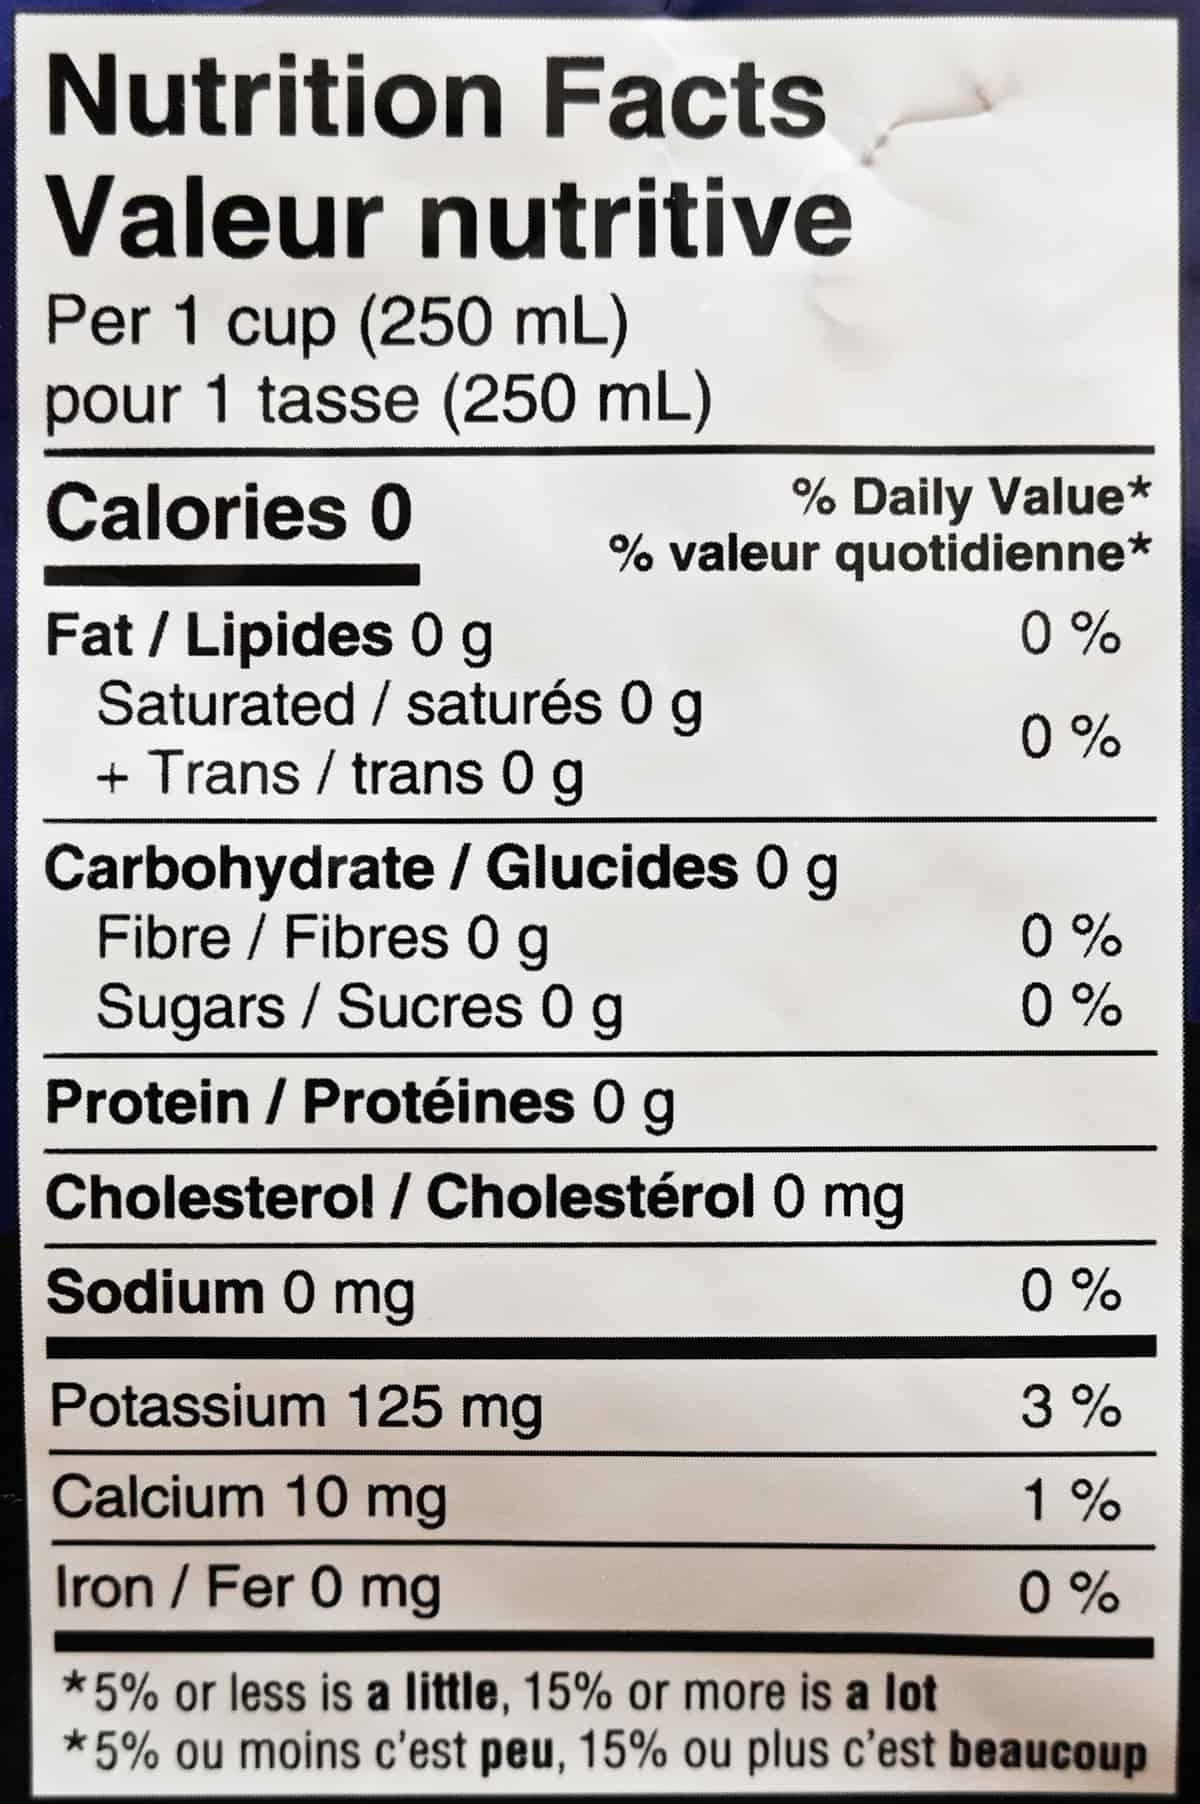 Image of the nutrition facts for the coffee beans from the back of the bag.